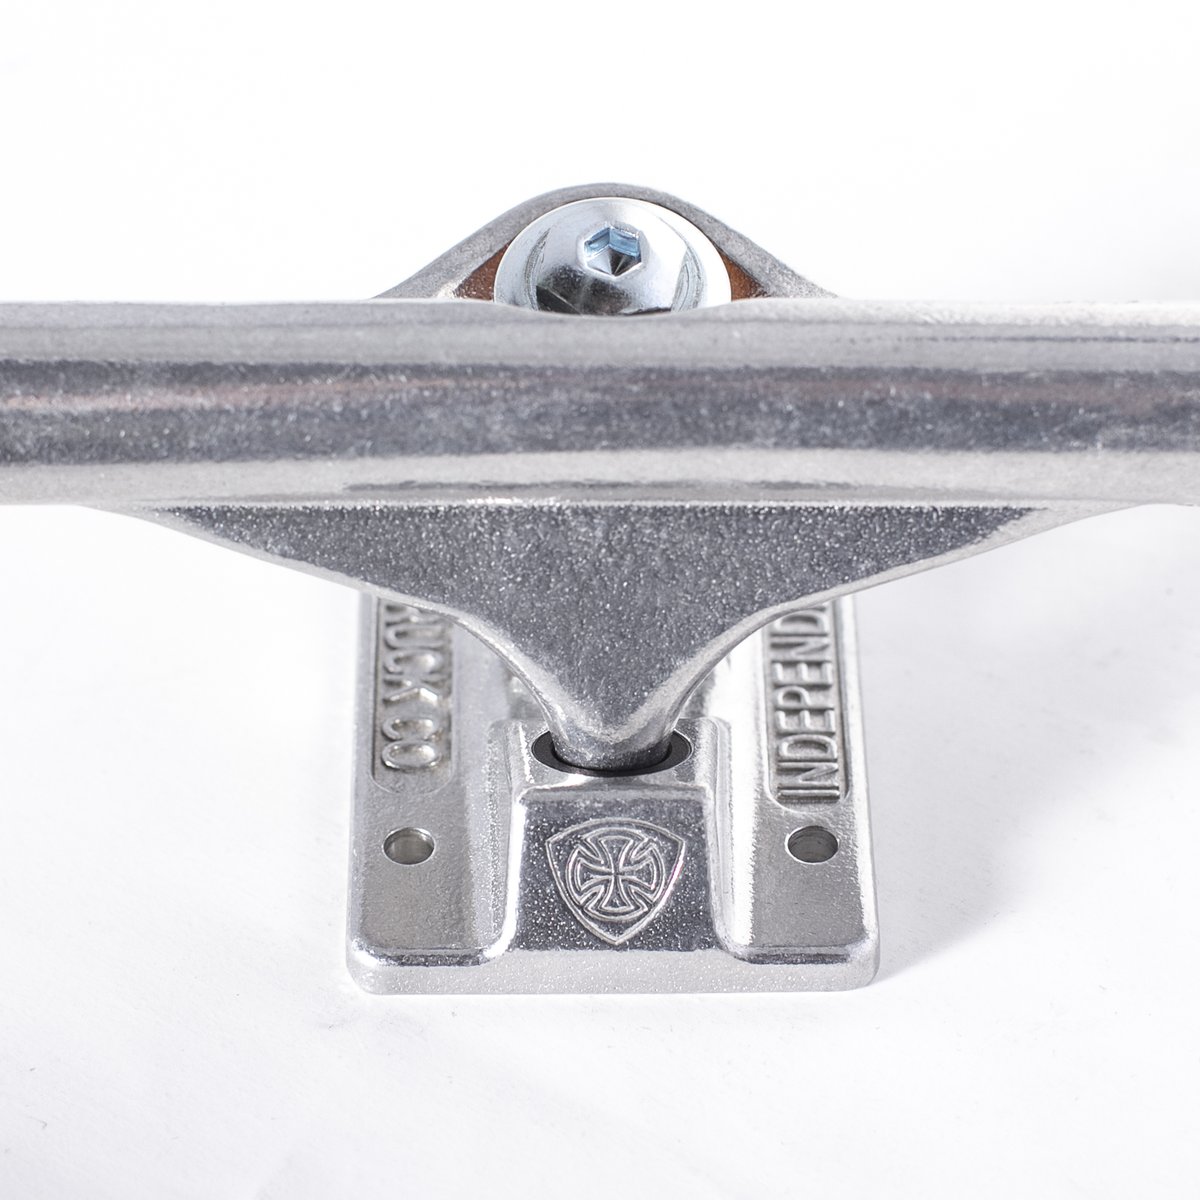 Mid Raw Polished Trucks (size options listed)